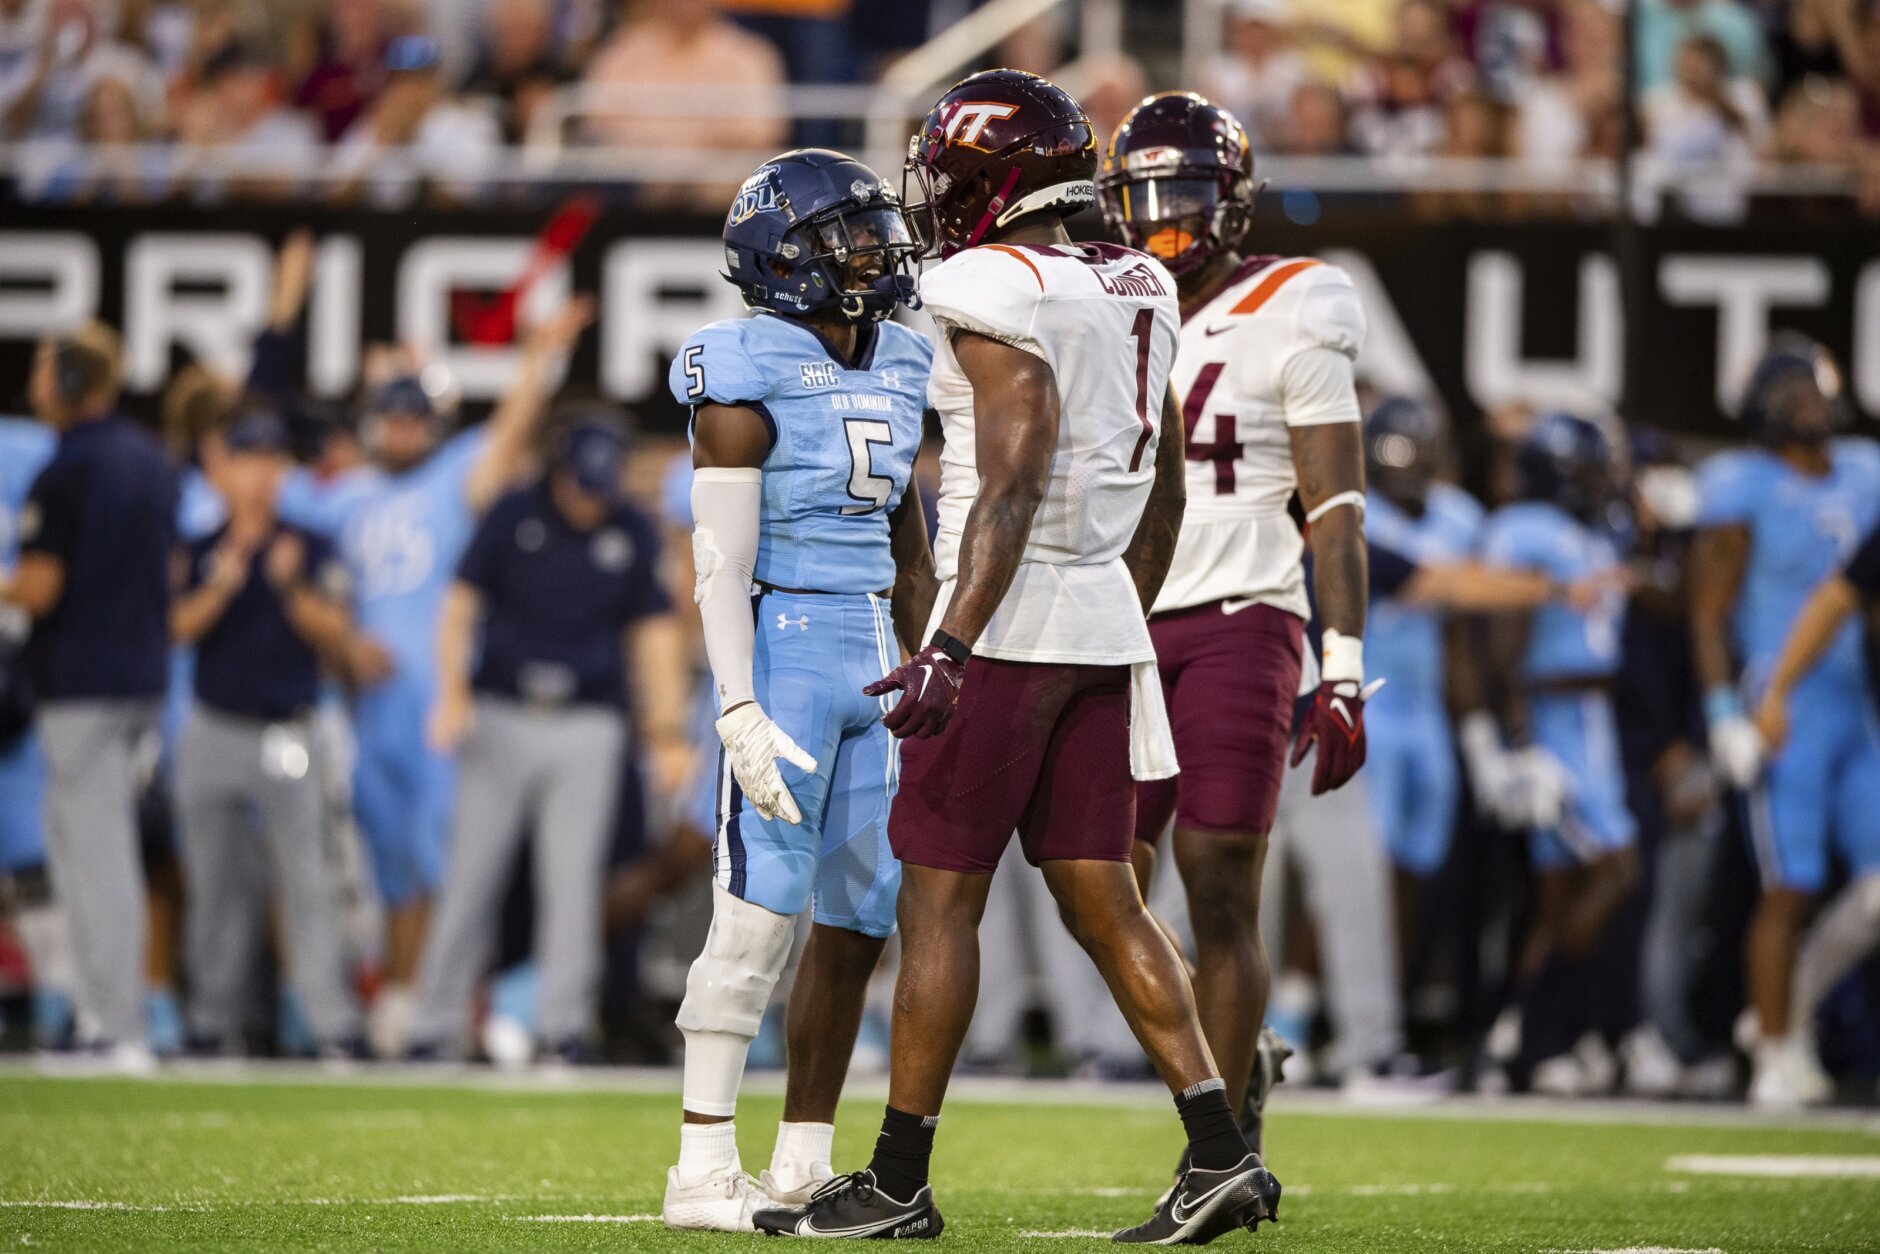 Wells propels Virginia Tech past Old Dominion 36-17